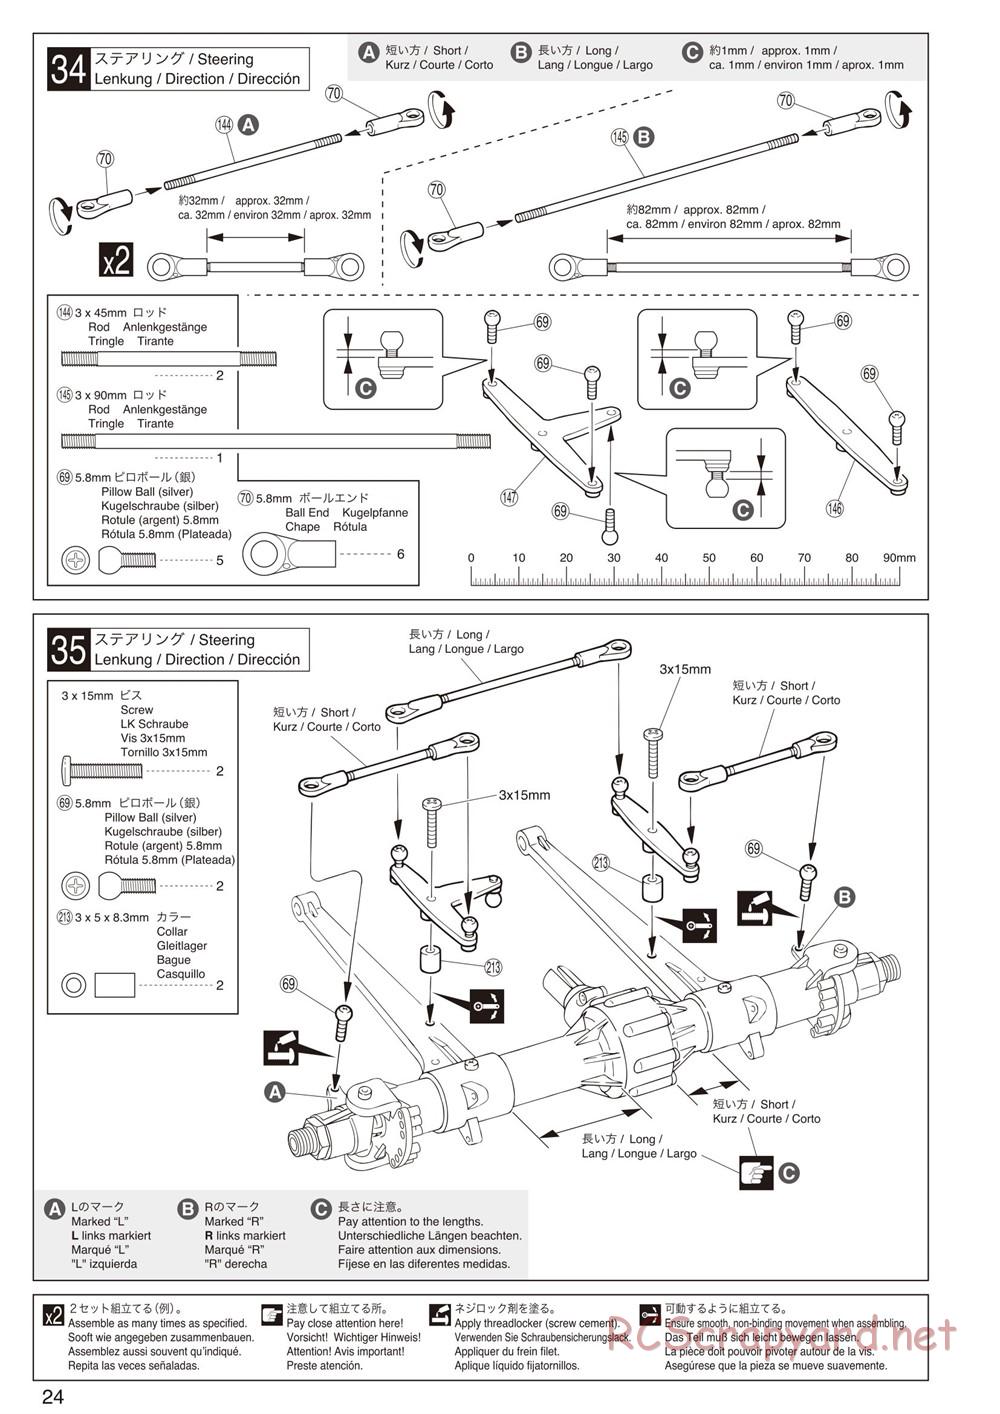 Kyosho - Mad Force Kruiser 2.0 - Manual - Page 24